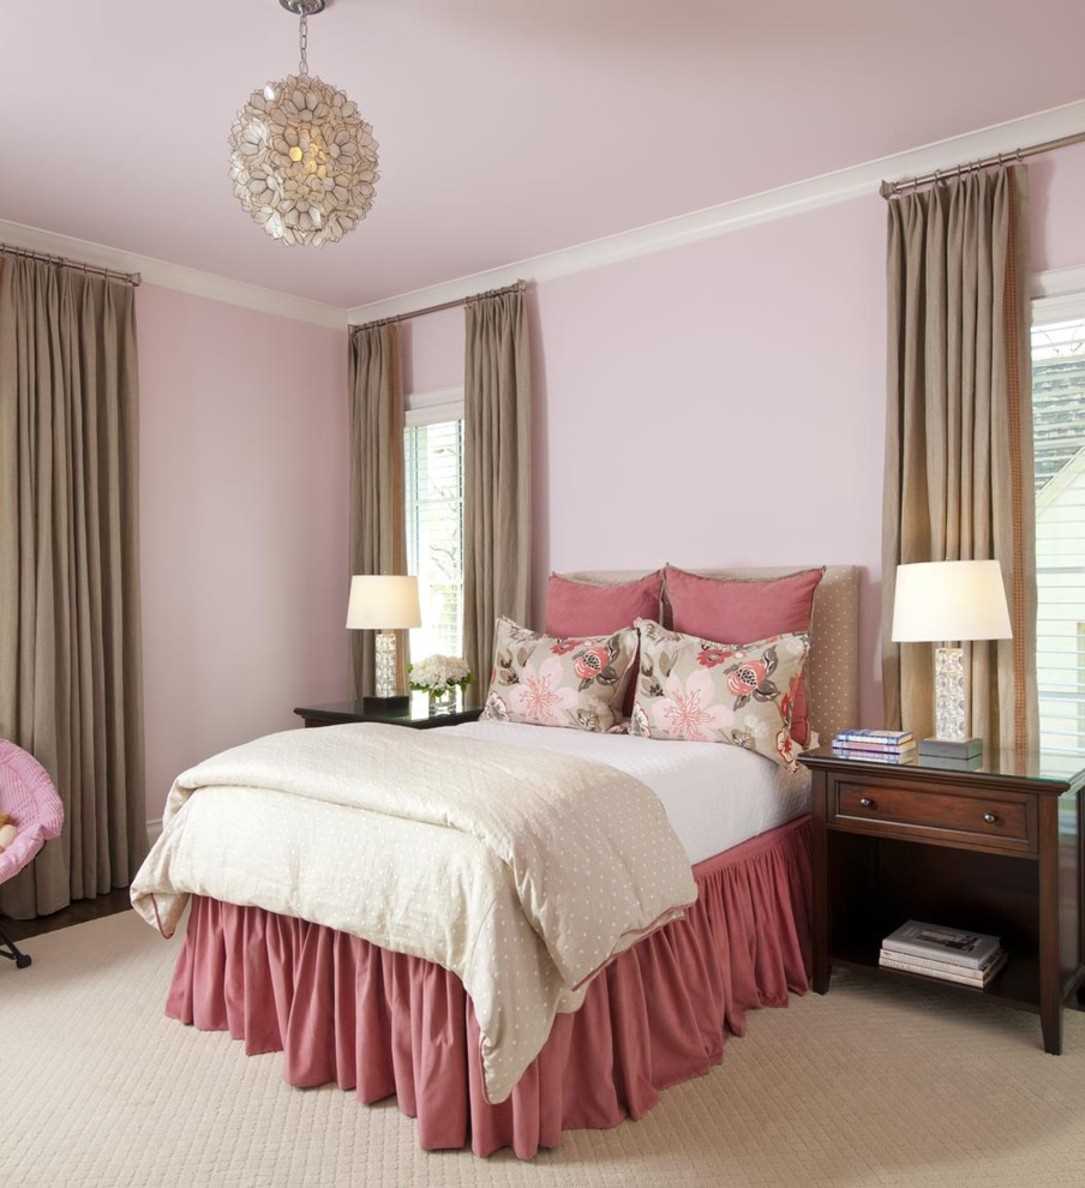 An example of using pink in a bright apartment design